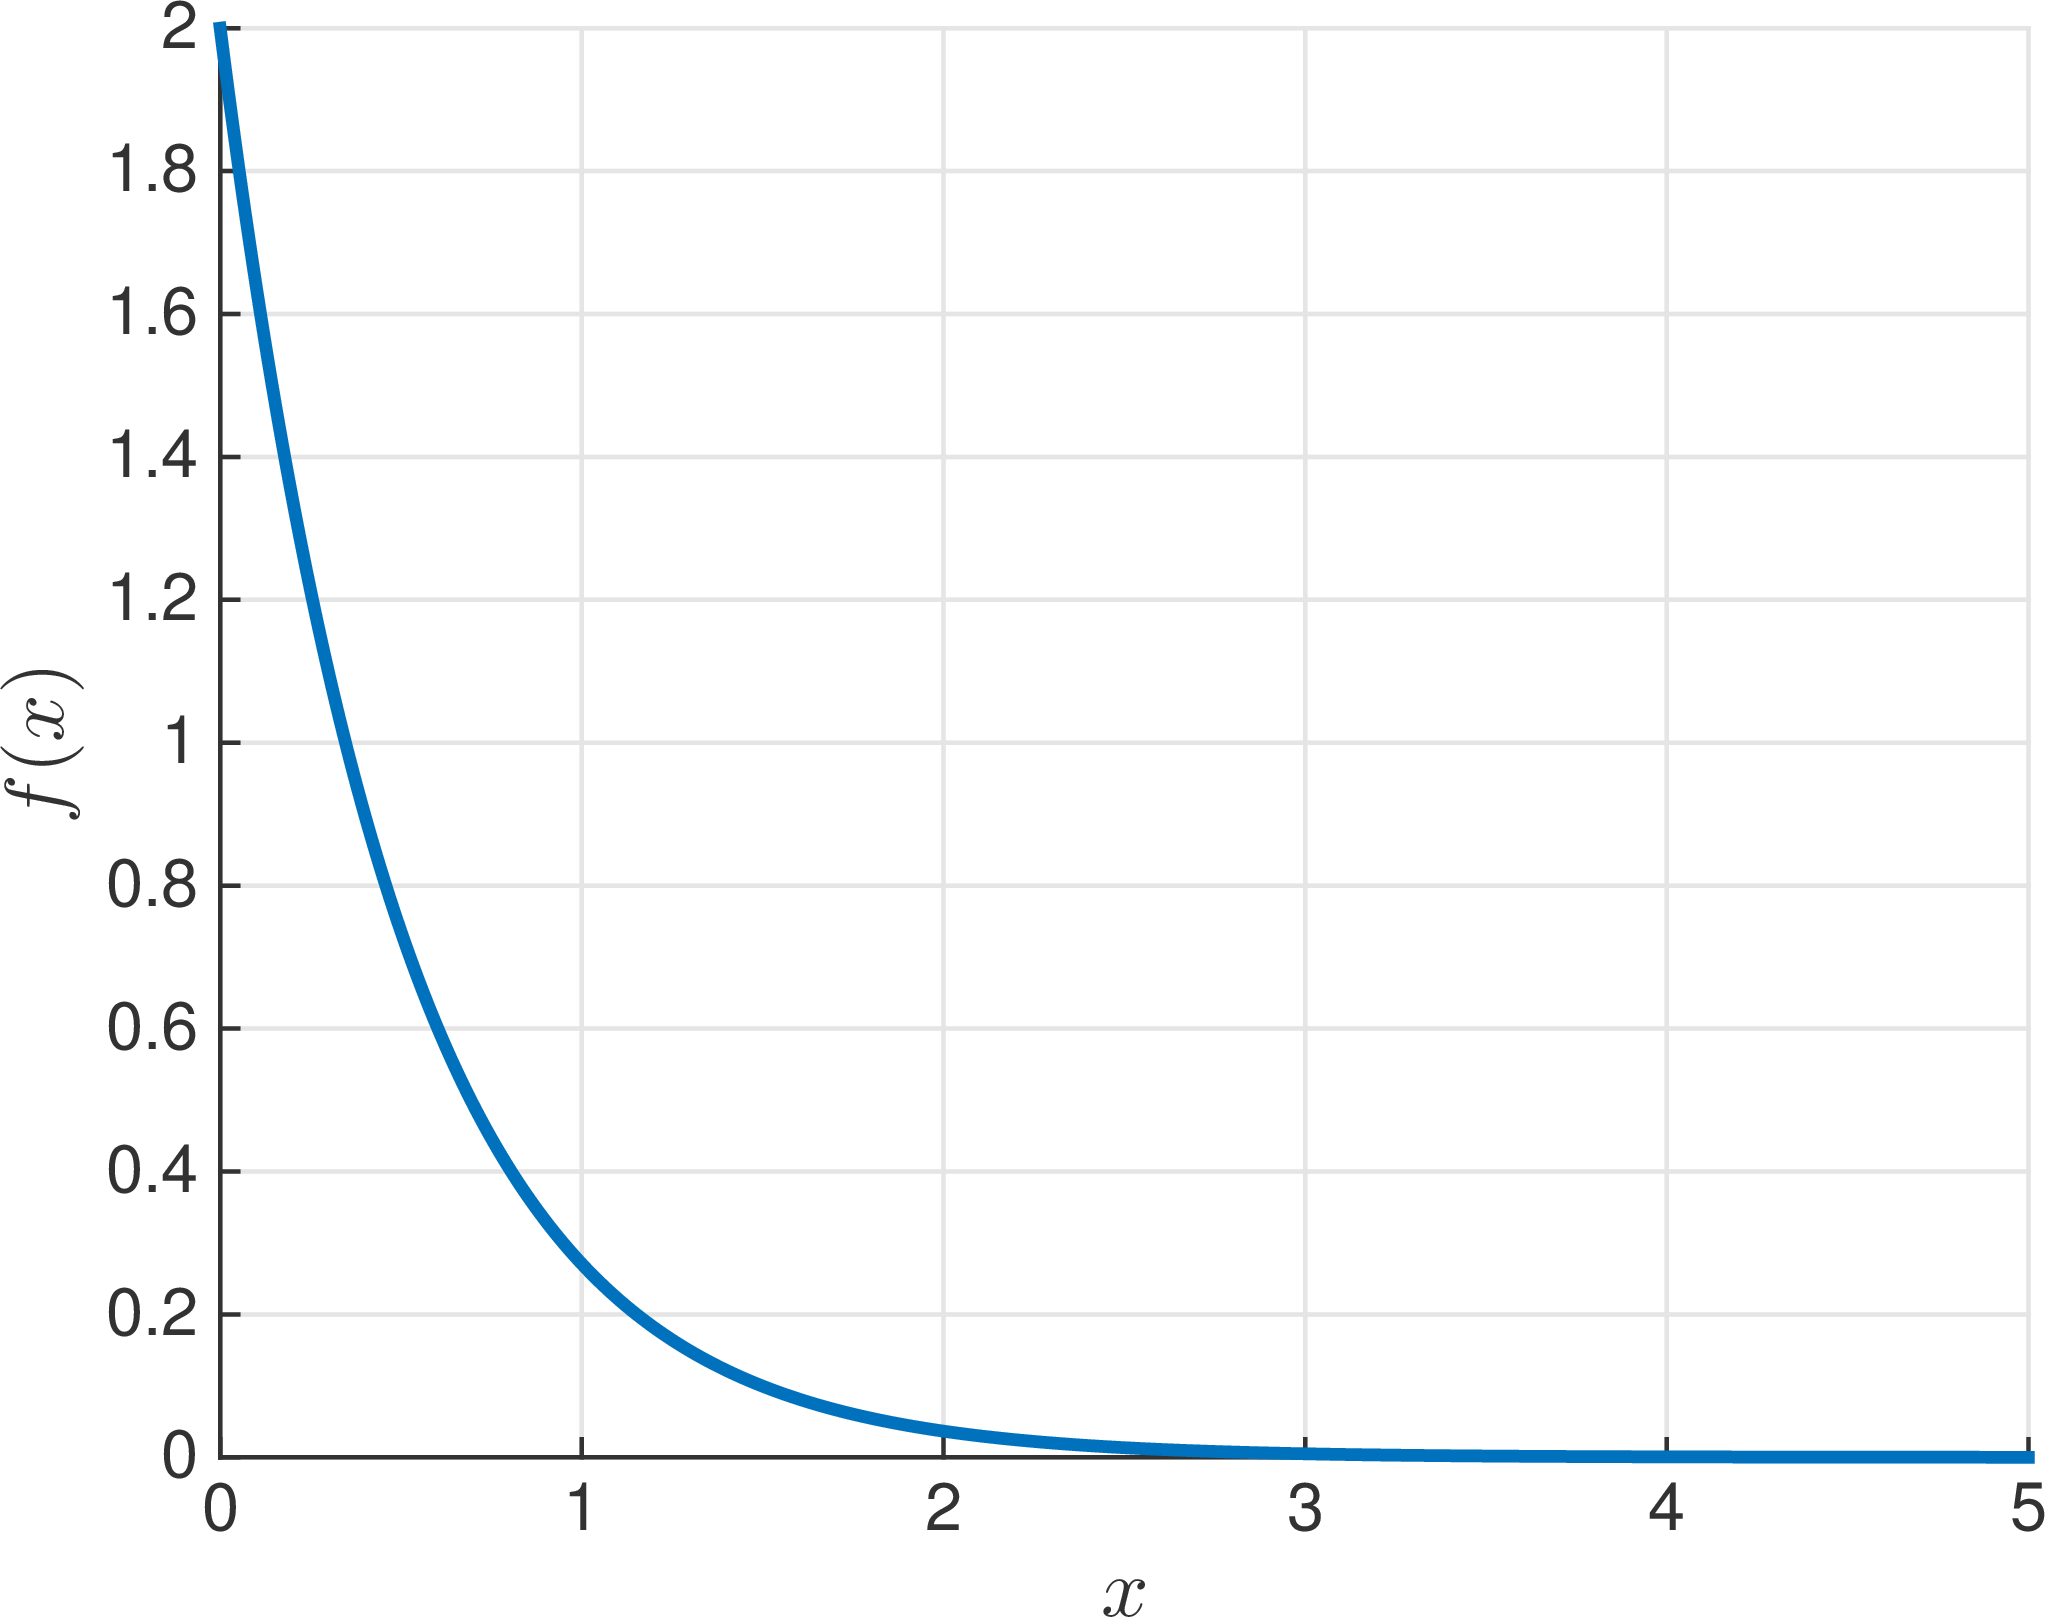 Figure 1: The density function for the exponential distribution with \lambda = 2.